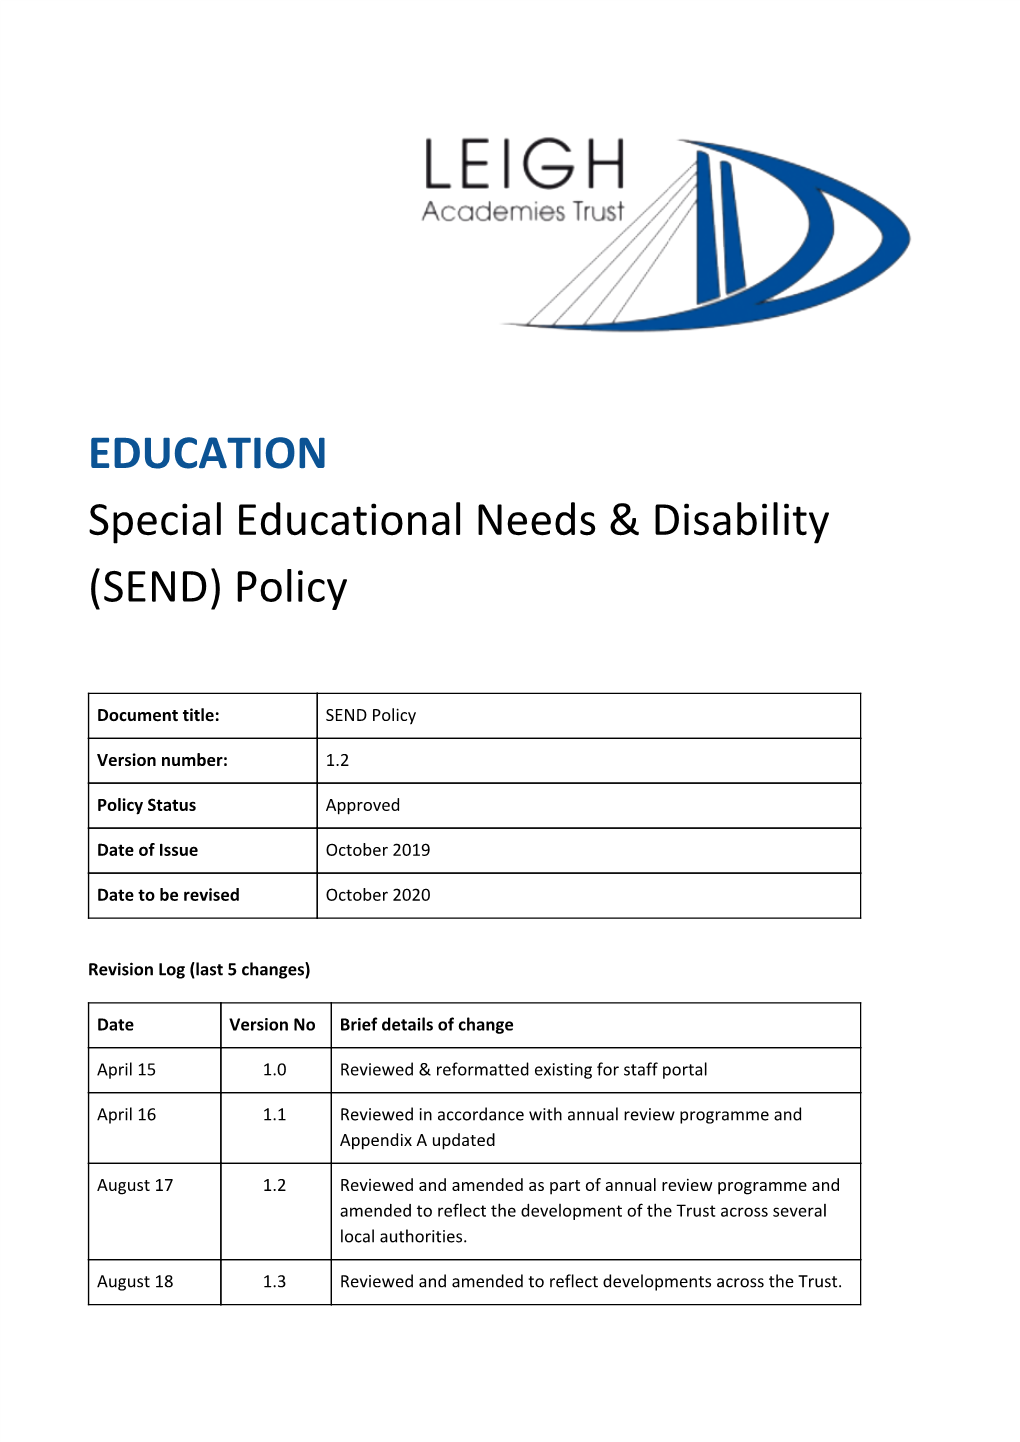 Special Educational Needs & Disability (SEND) Policy